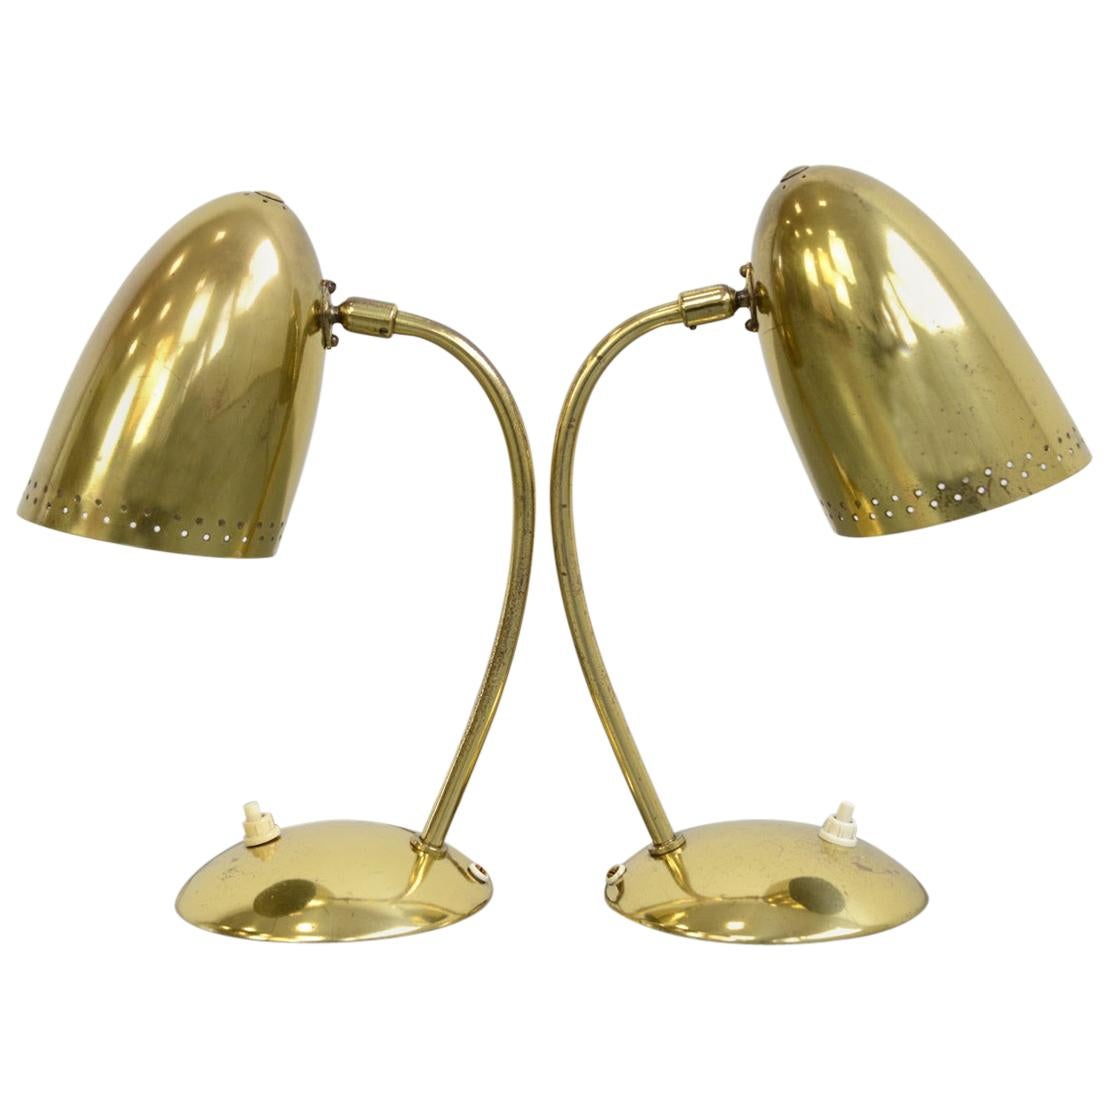 Model 4007 Table Lamps by Christian Dell for Kaiser Idell, circa 1930s